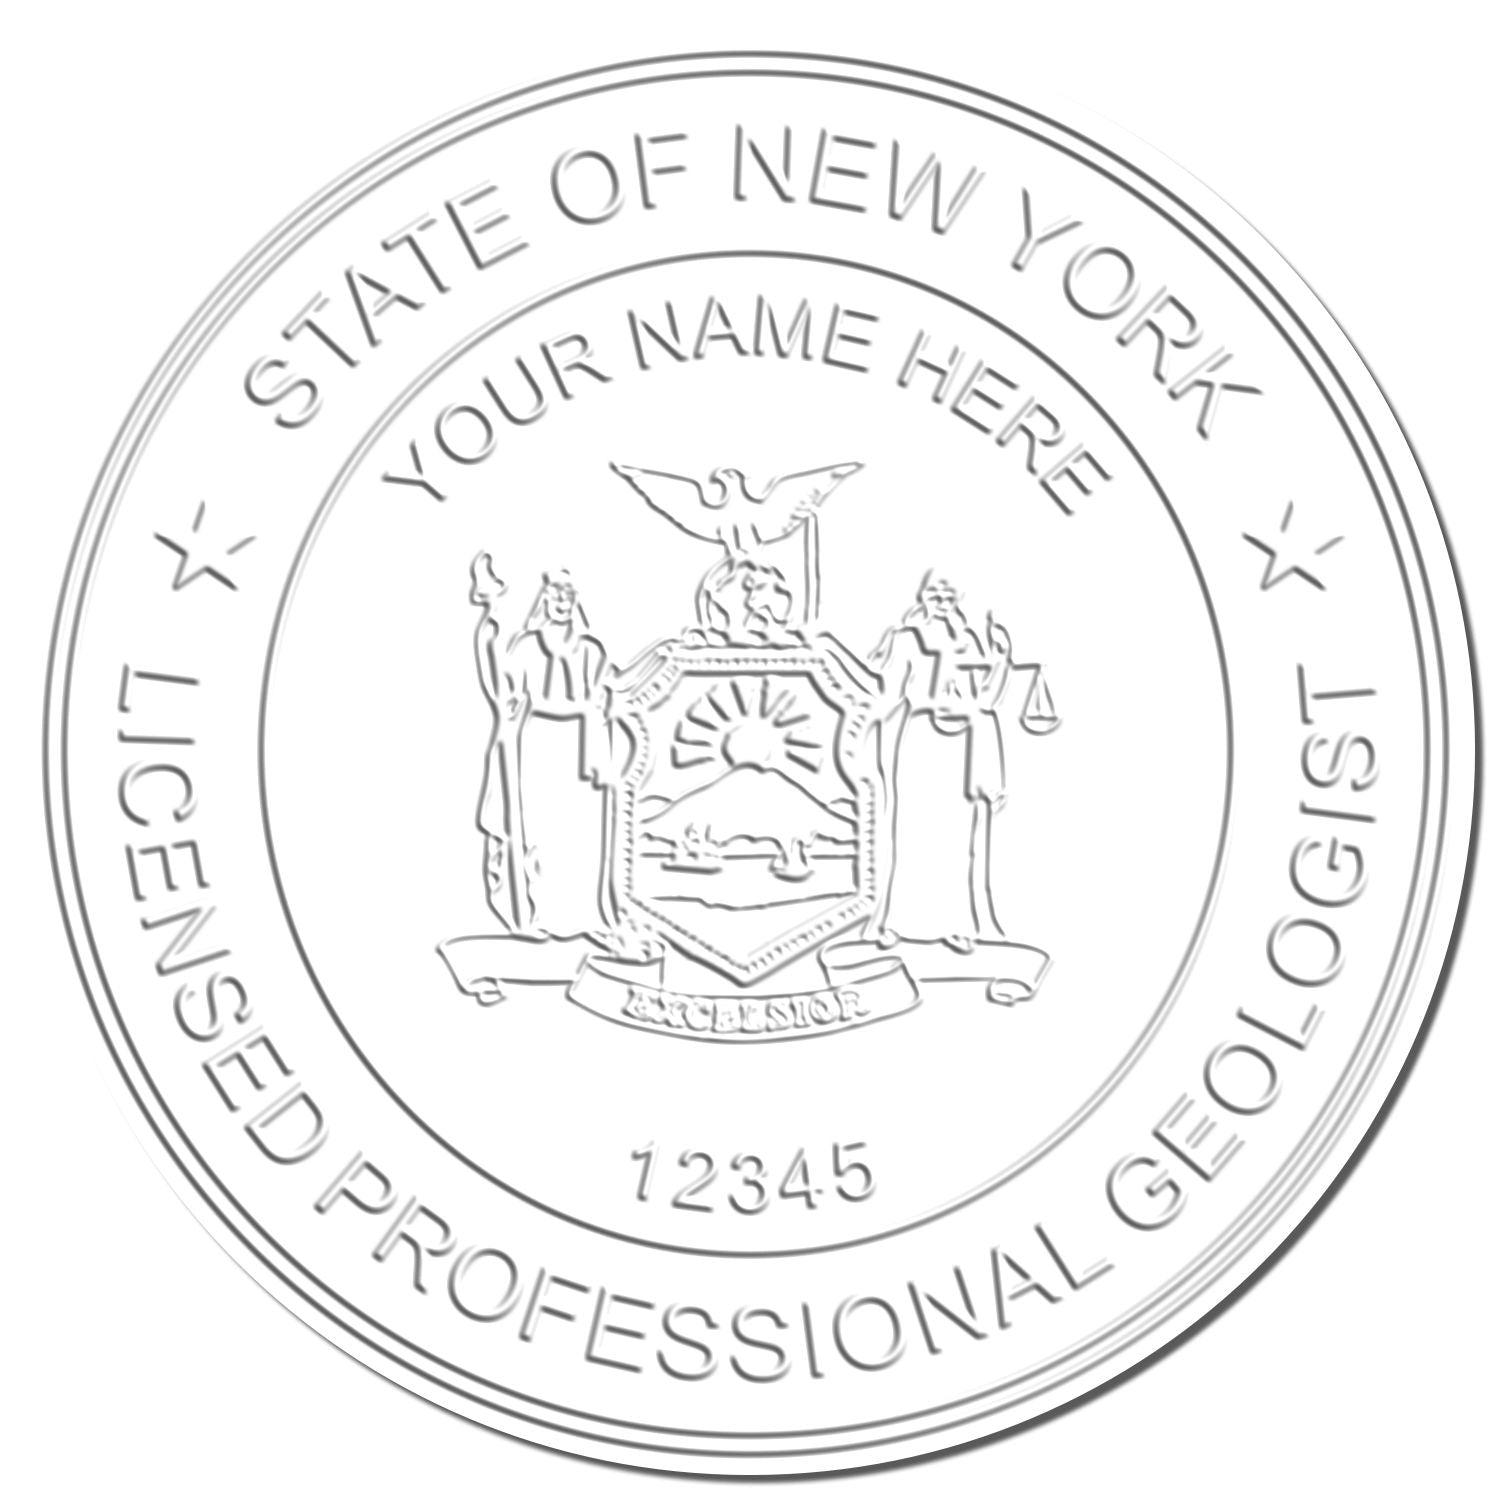 The main image for the New York Geologist Desk Seal depicting a sample of the imprint and imprint sample